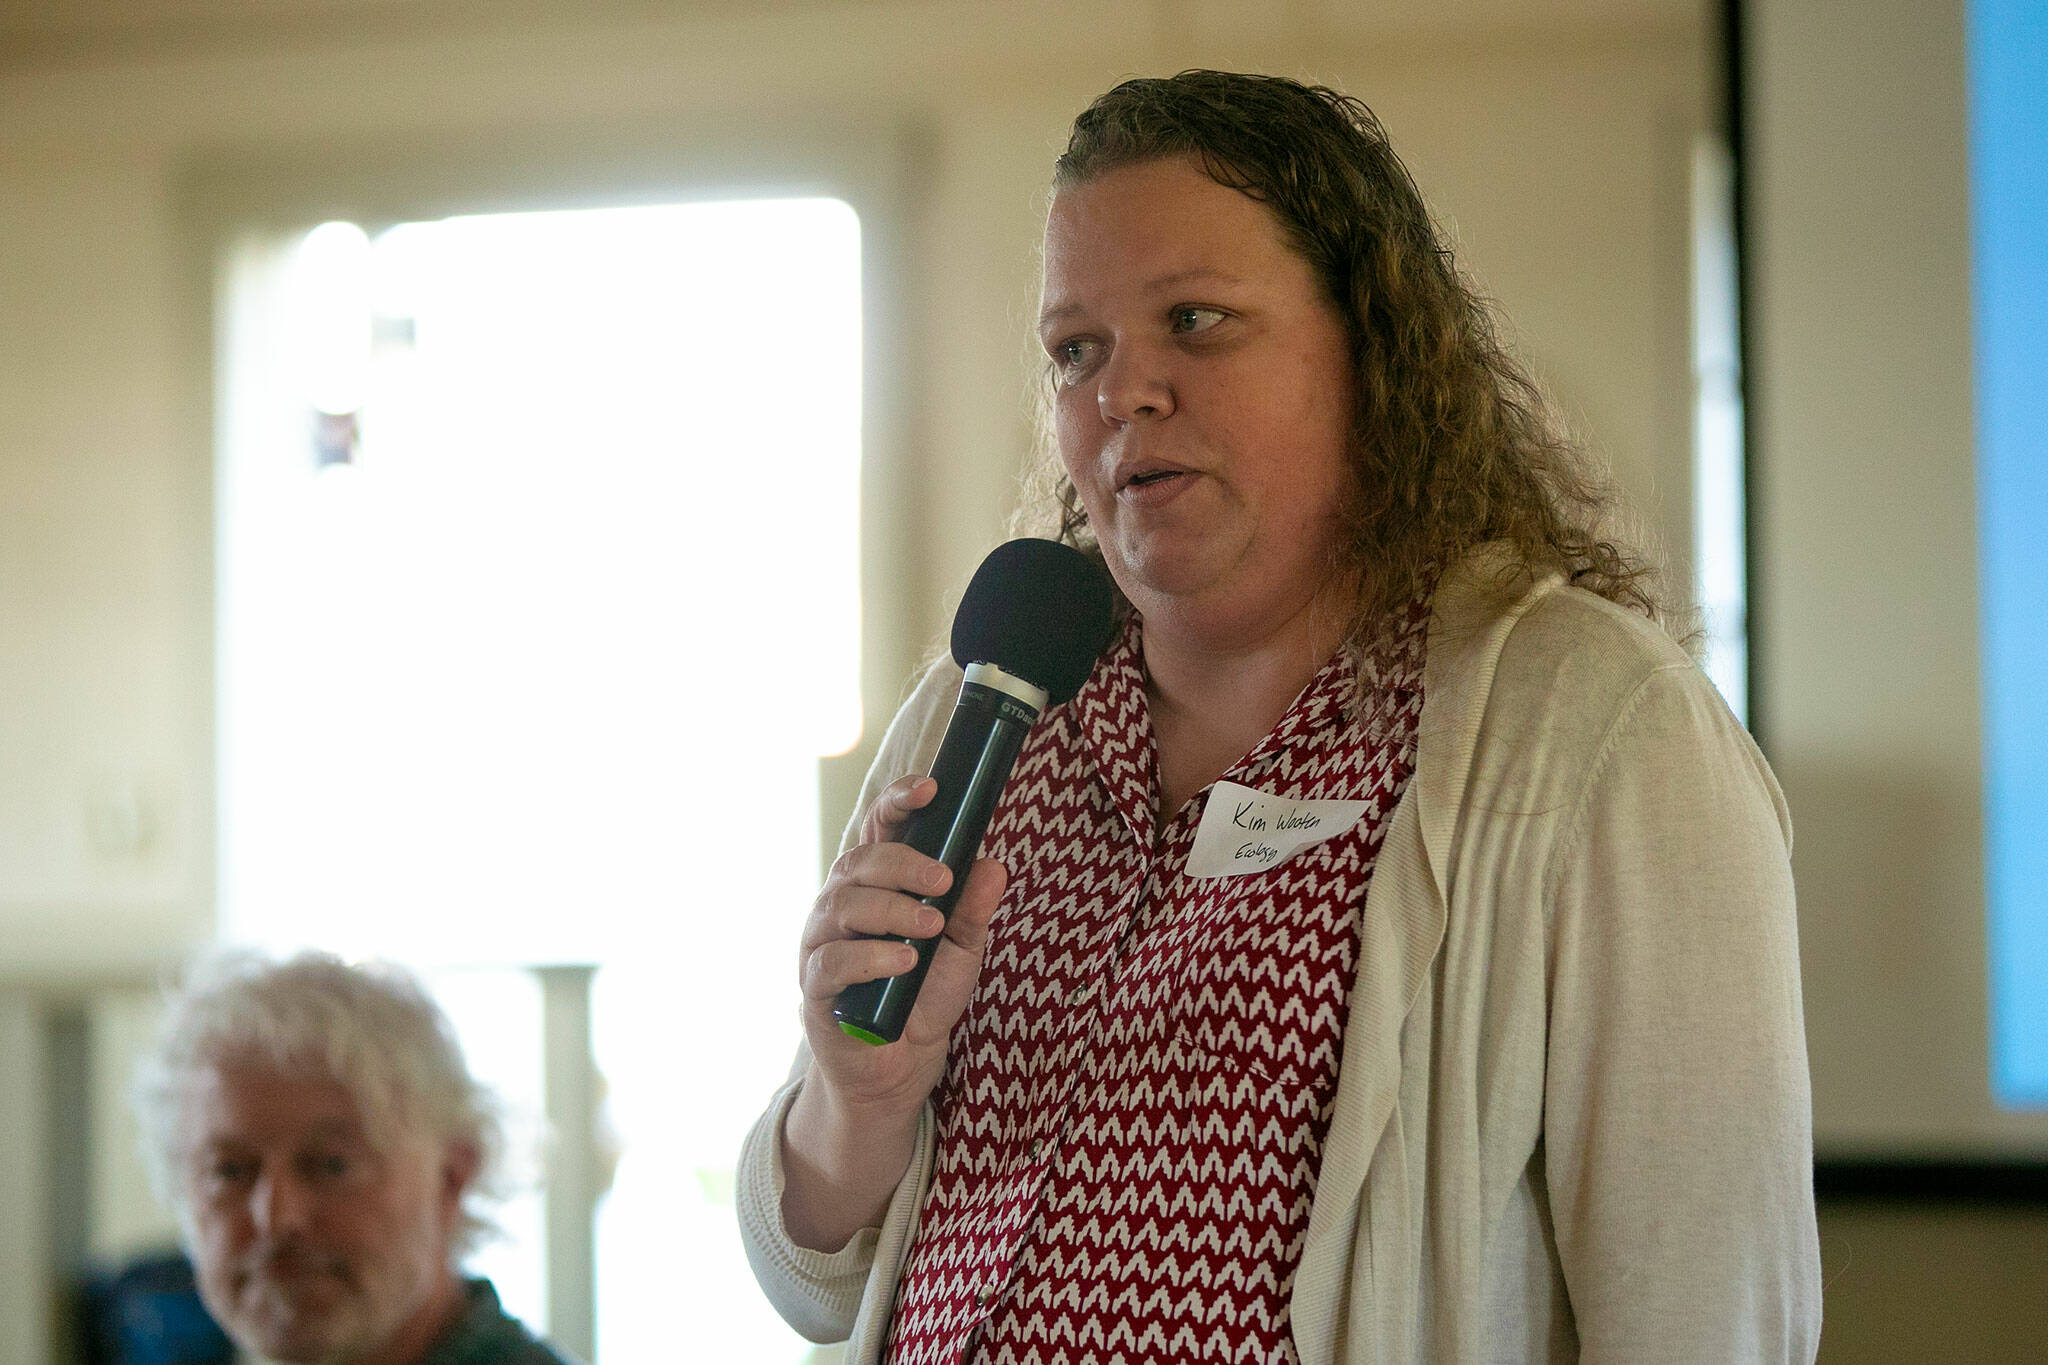 Kimberly Wooten, with the Washington Department of Ecology, responds to a question regarding PFAS found on Whidbey Island during a public forum at the Coupeville Recreation Hall on June 22, 2023, in Coupeville, Washington. (Ryan Berry / The Herald)